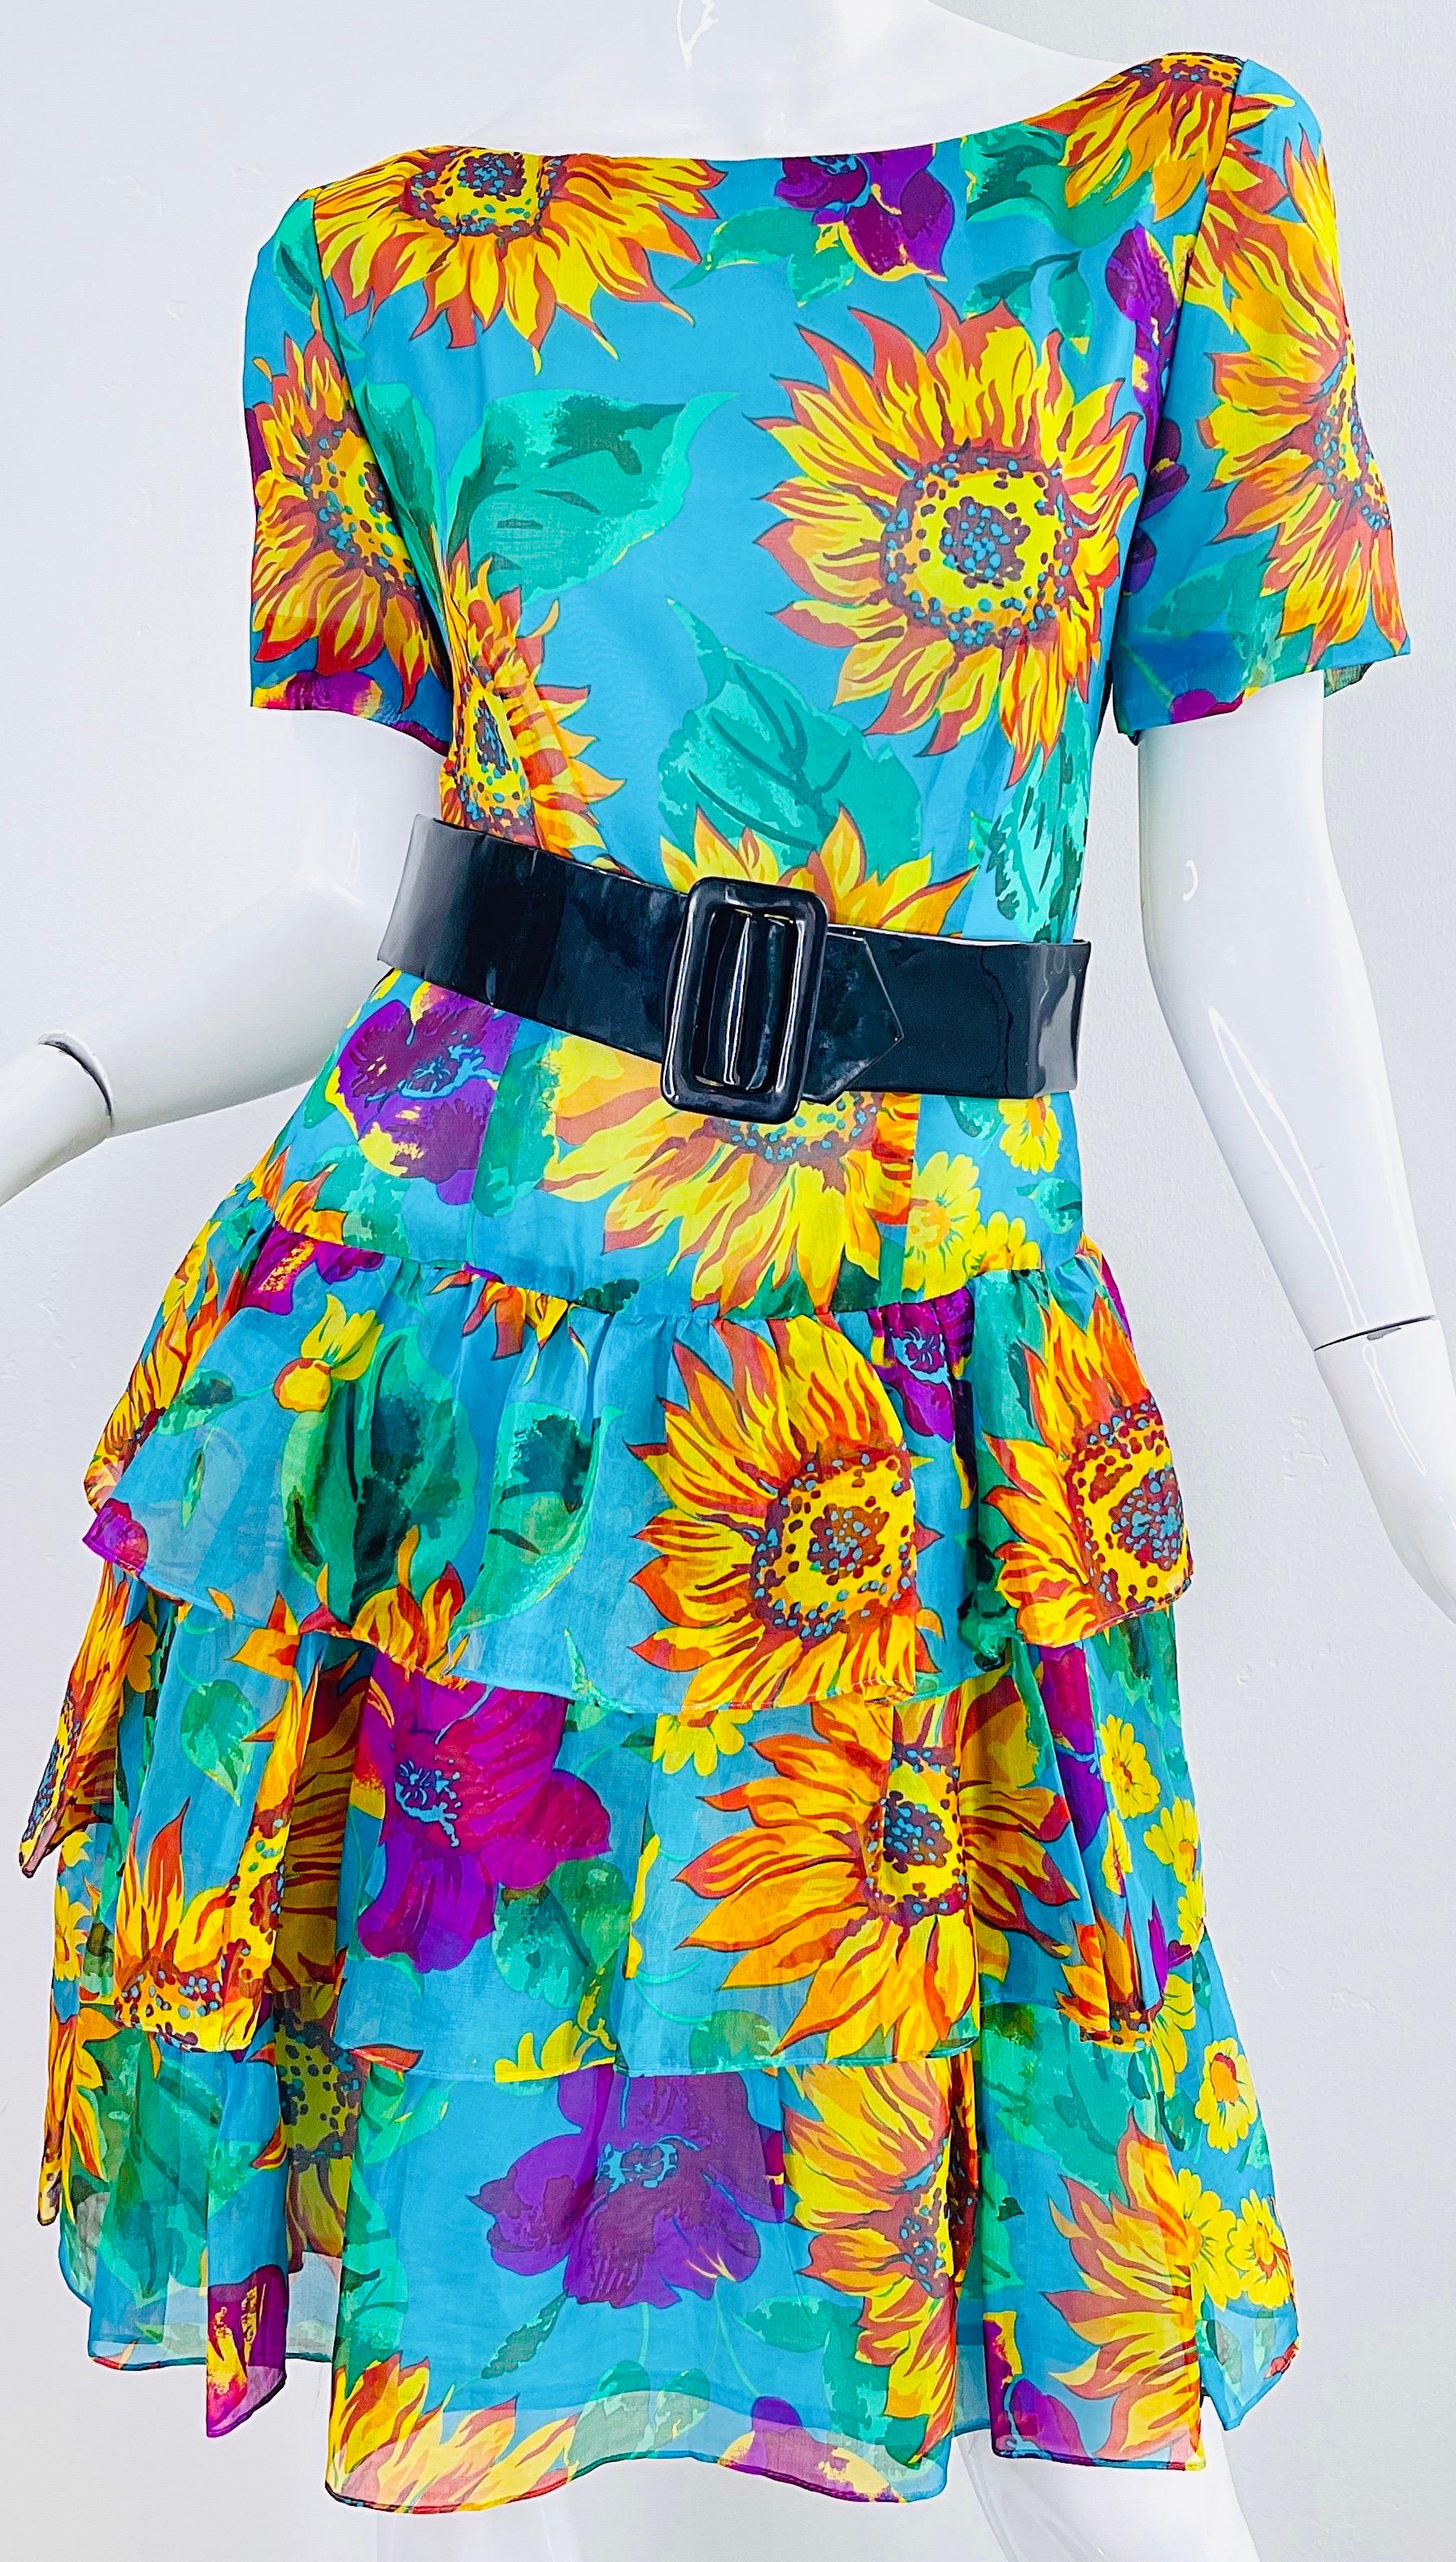 Chic 1980s Silk Chiffon Size 8 / 10 Sunflower Print Turquoise Vintage 80s Dress For Sale 6